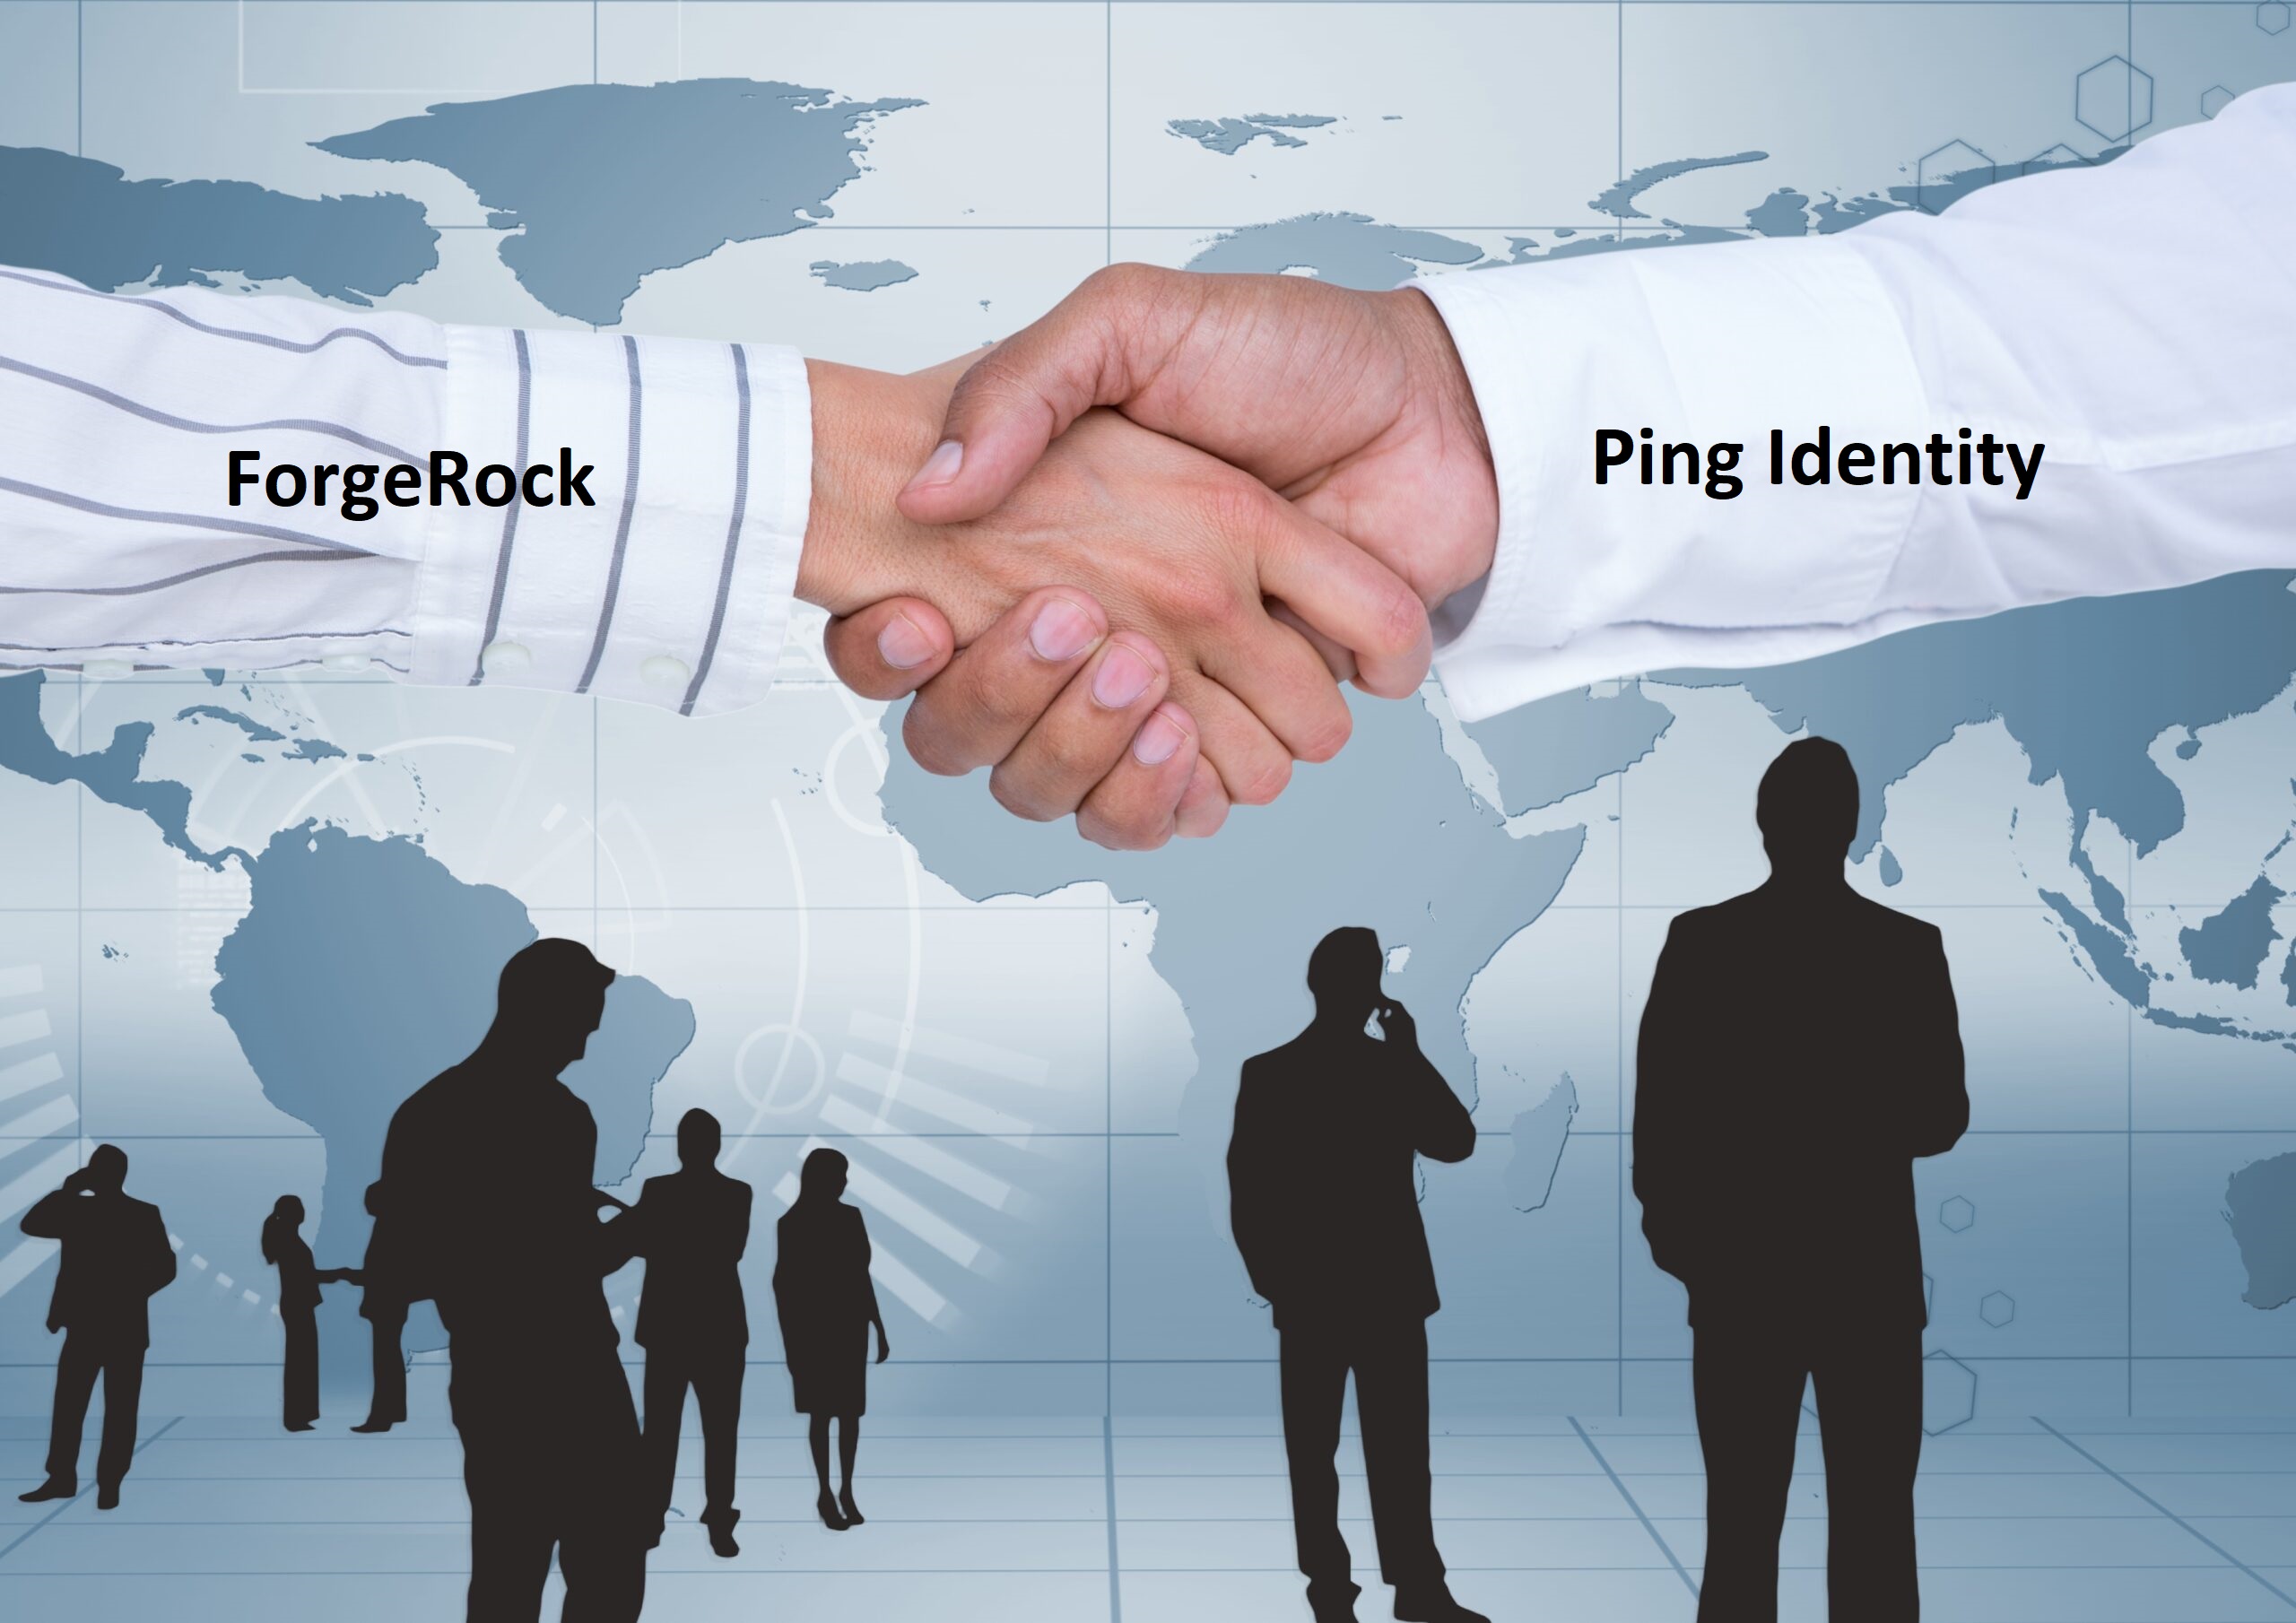 The Merger between ForgeRock and Ping Identity